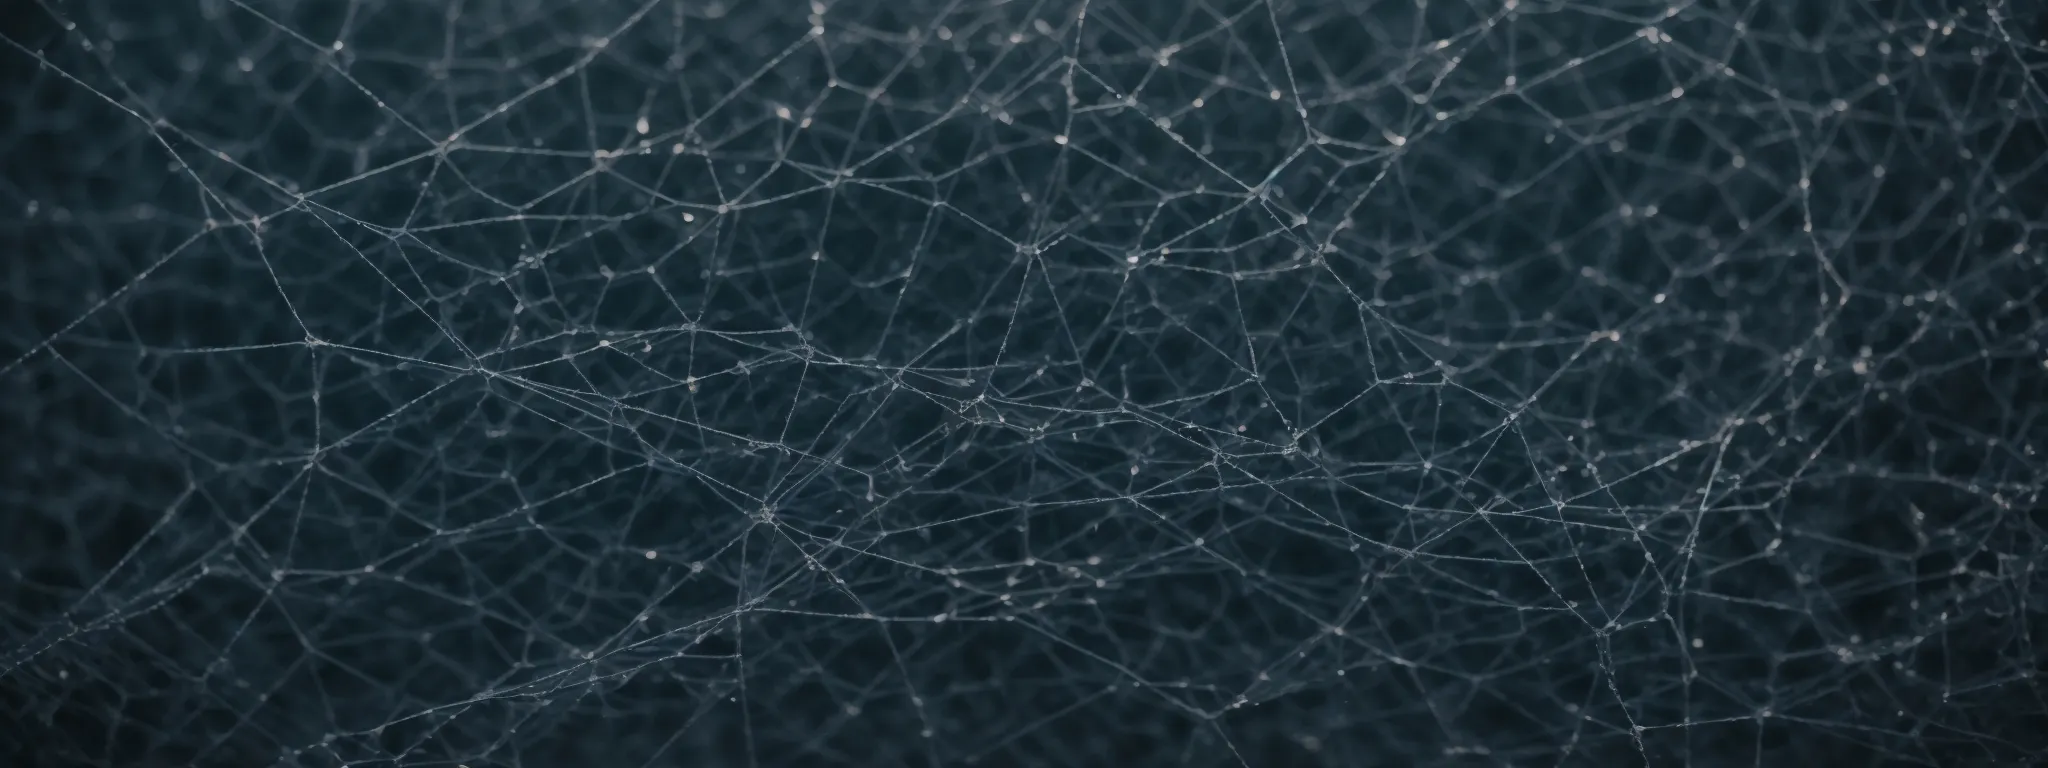 a magnifying glass hovering over a web of interconnected nodes, separating the strong links from the weak ones.